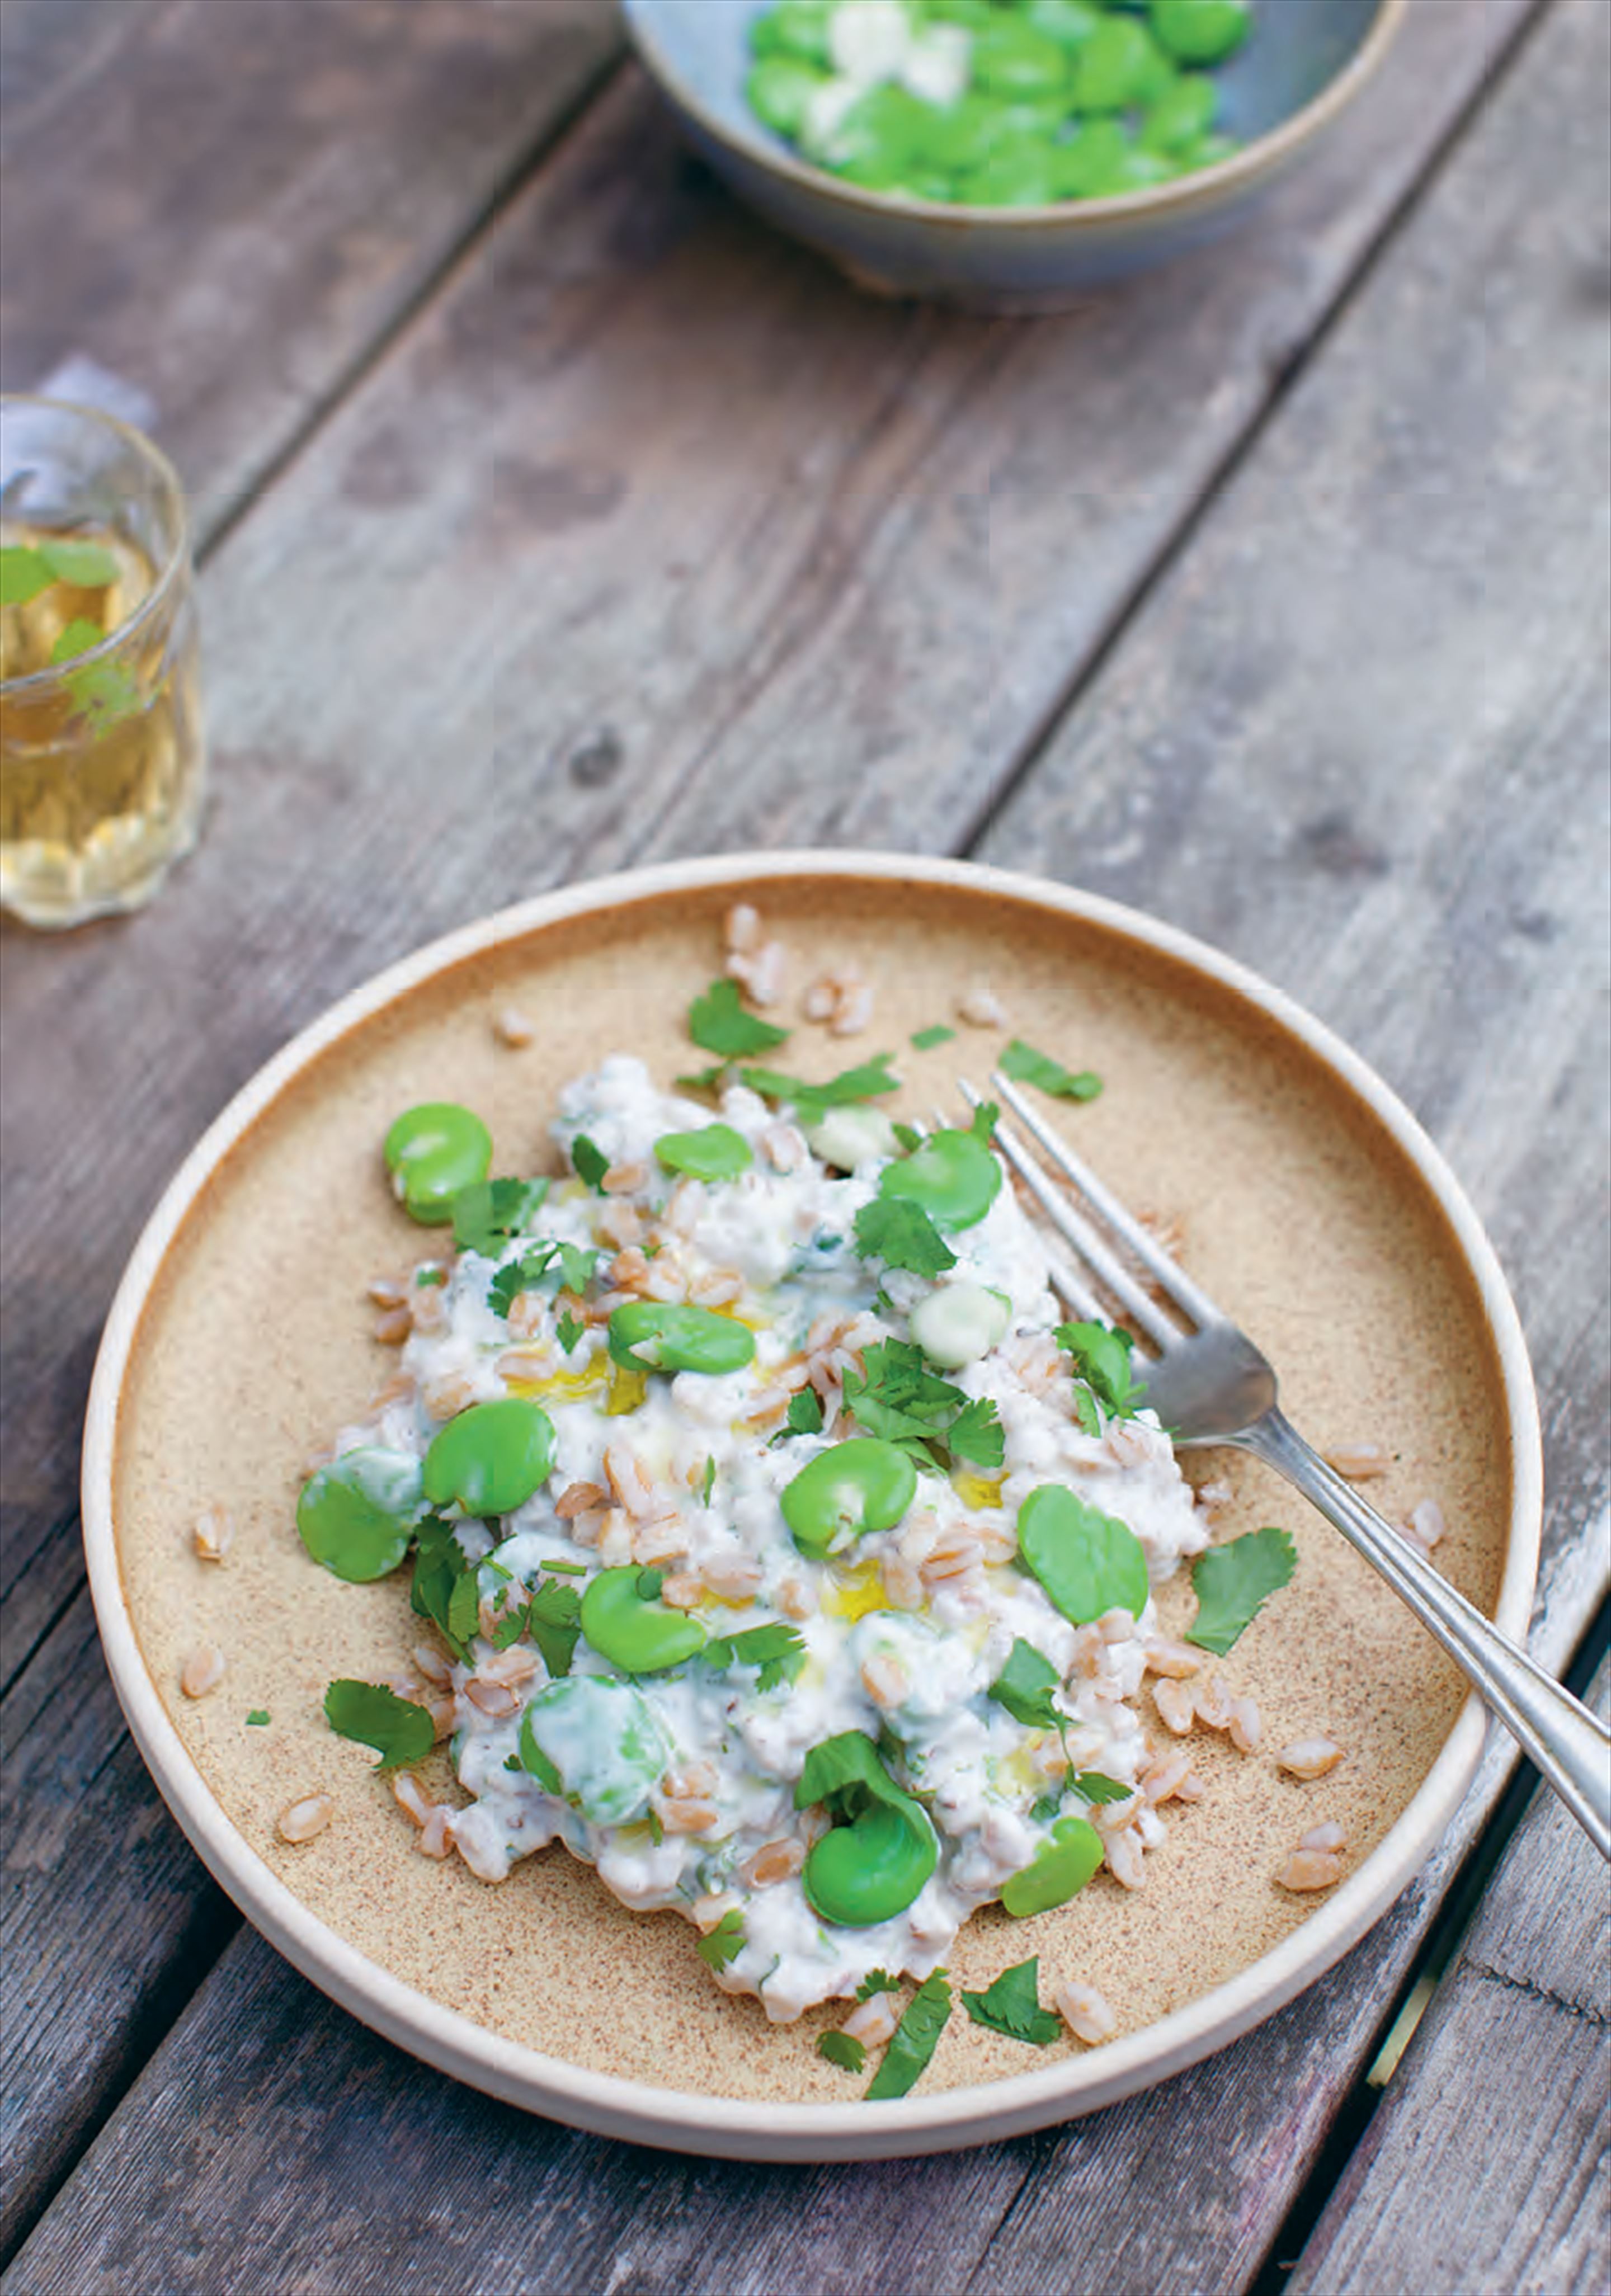 Wheat grains with broad beans and tahini